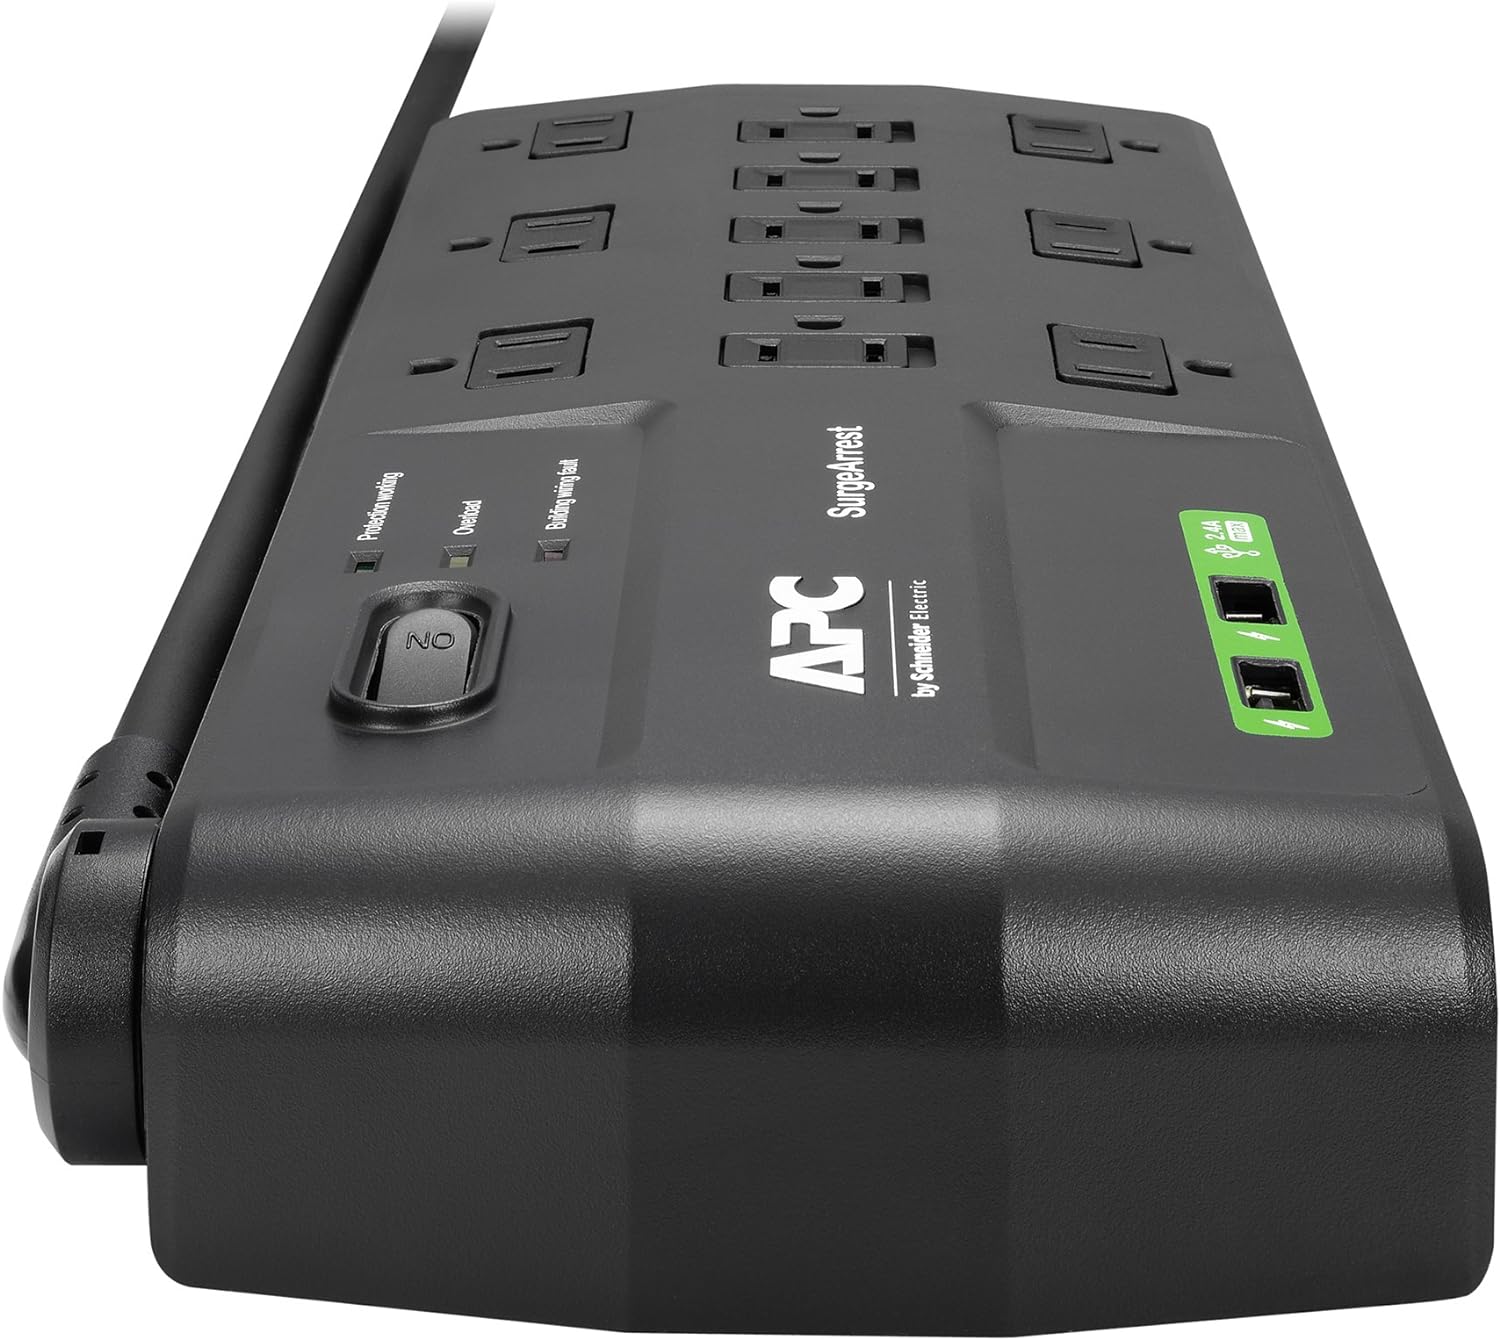 APC Performance Surge Protector with USB Ports: The Ultimate Power Strip Review